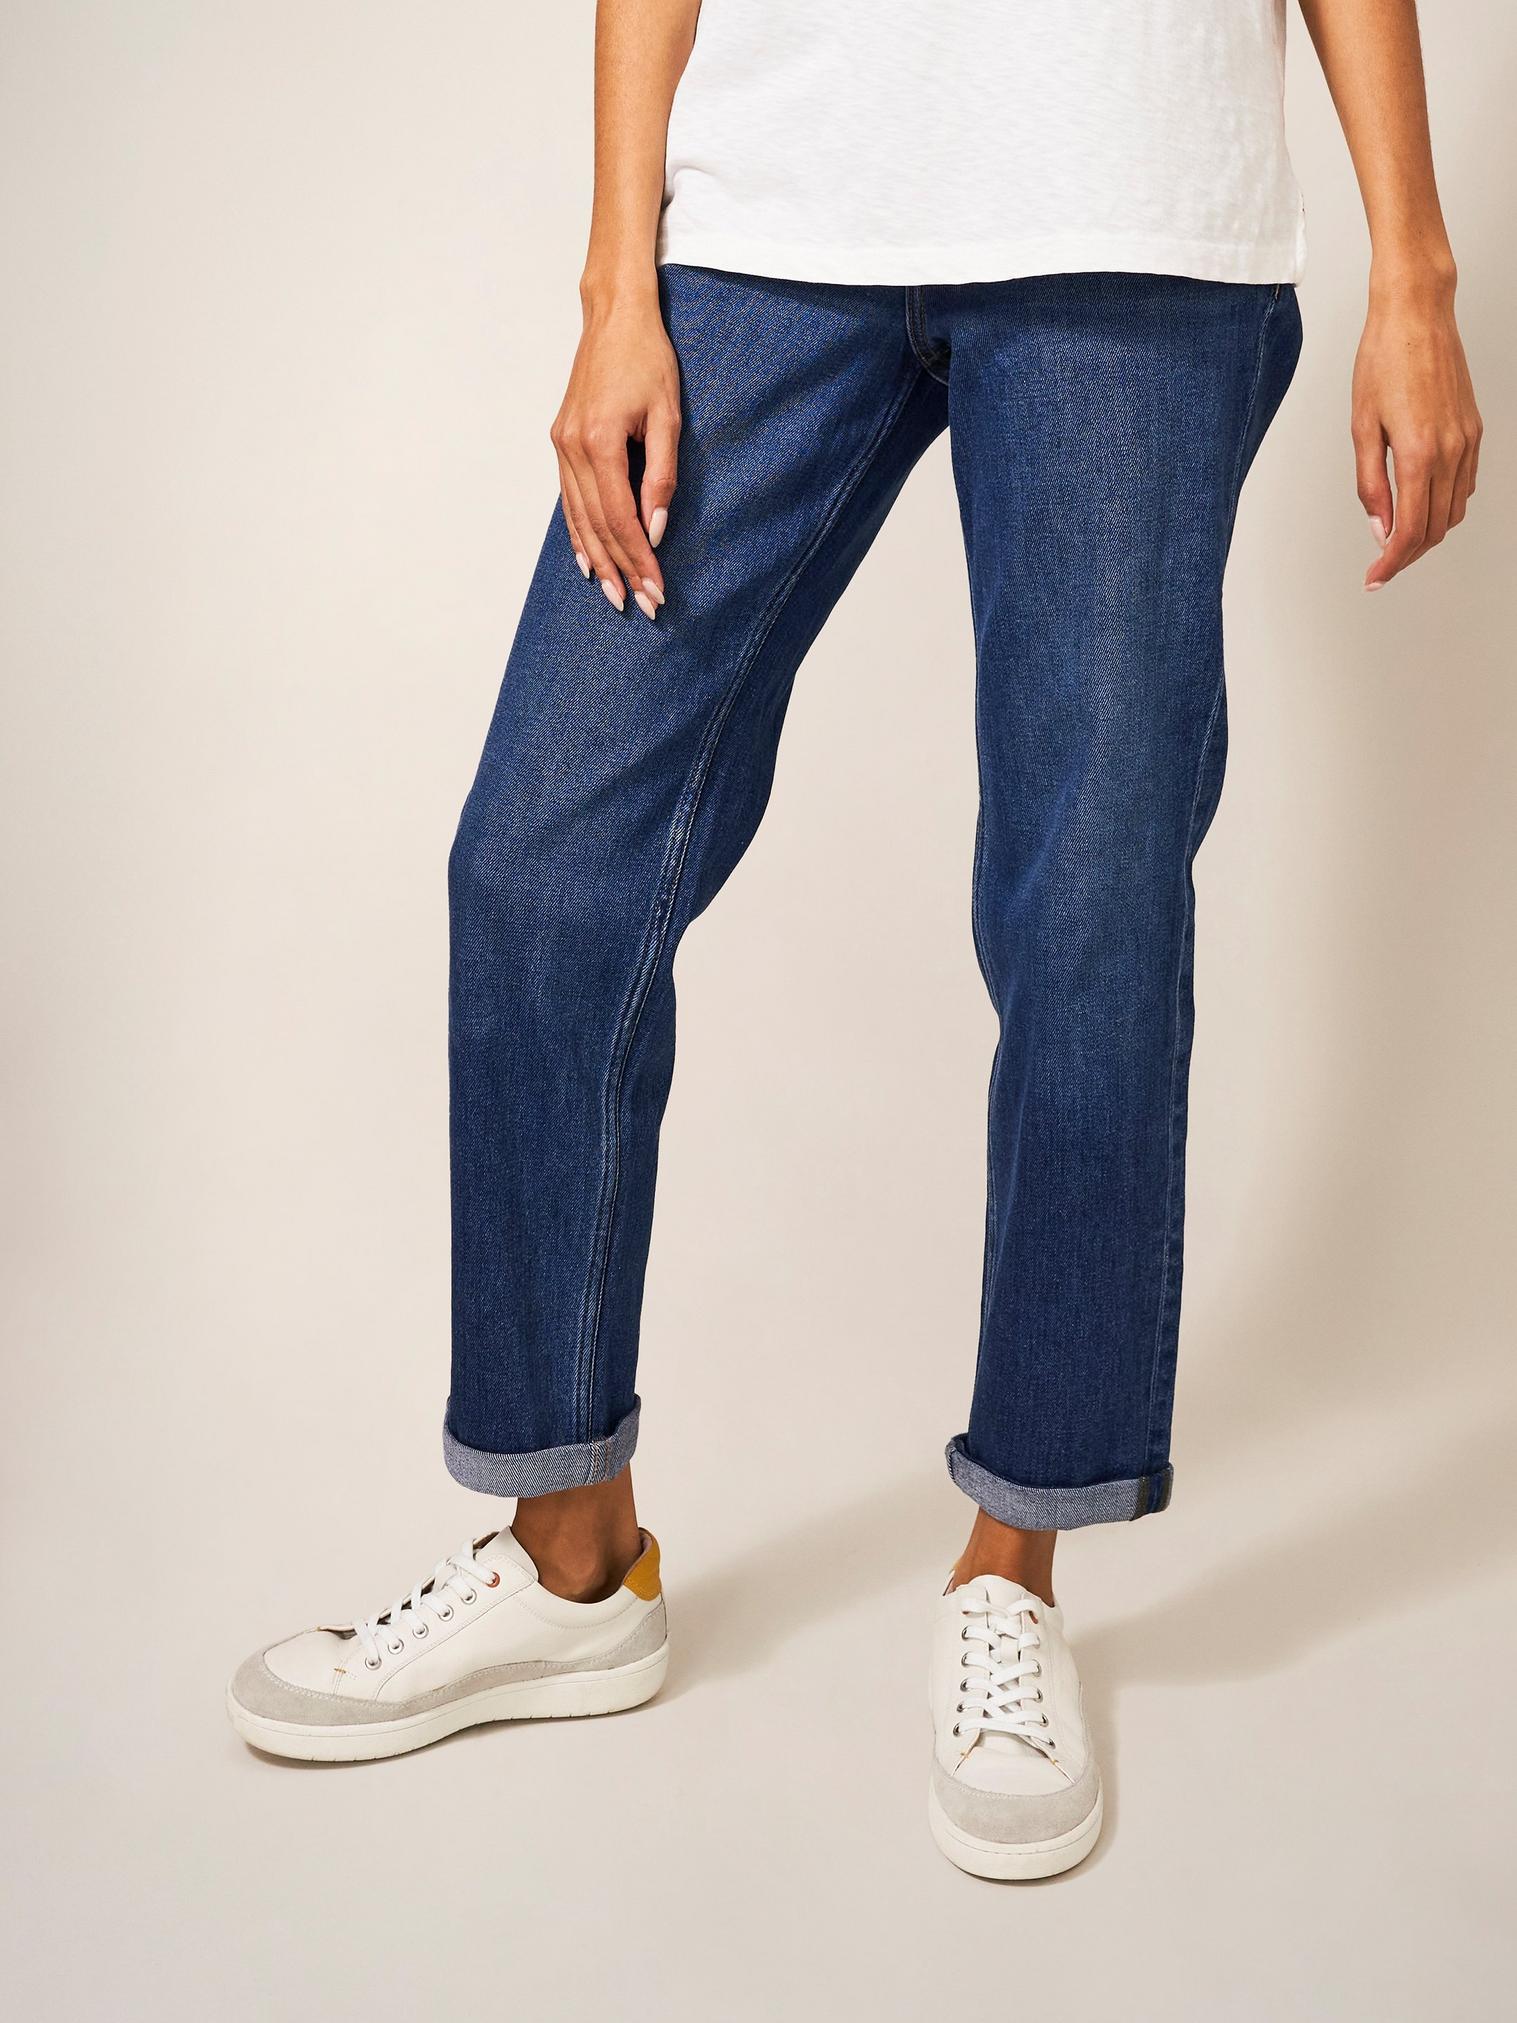 Katy Relaxed Slim Jean in MID DENIM - LIFESTYLE